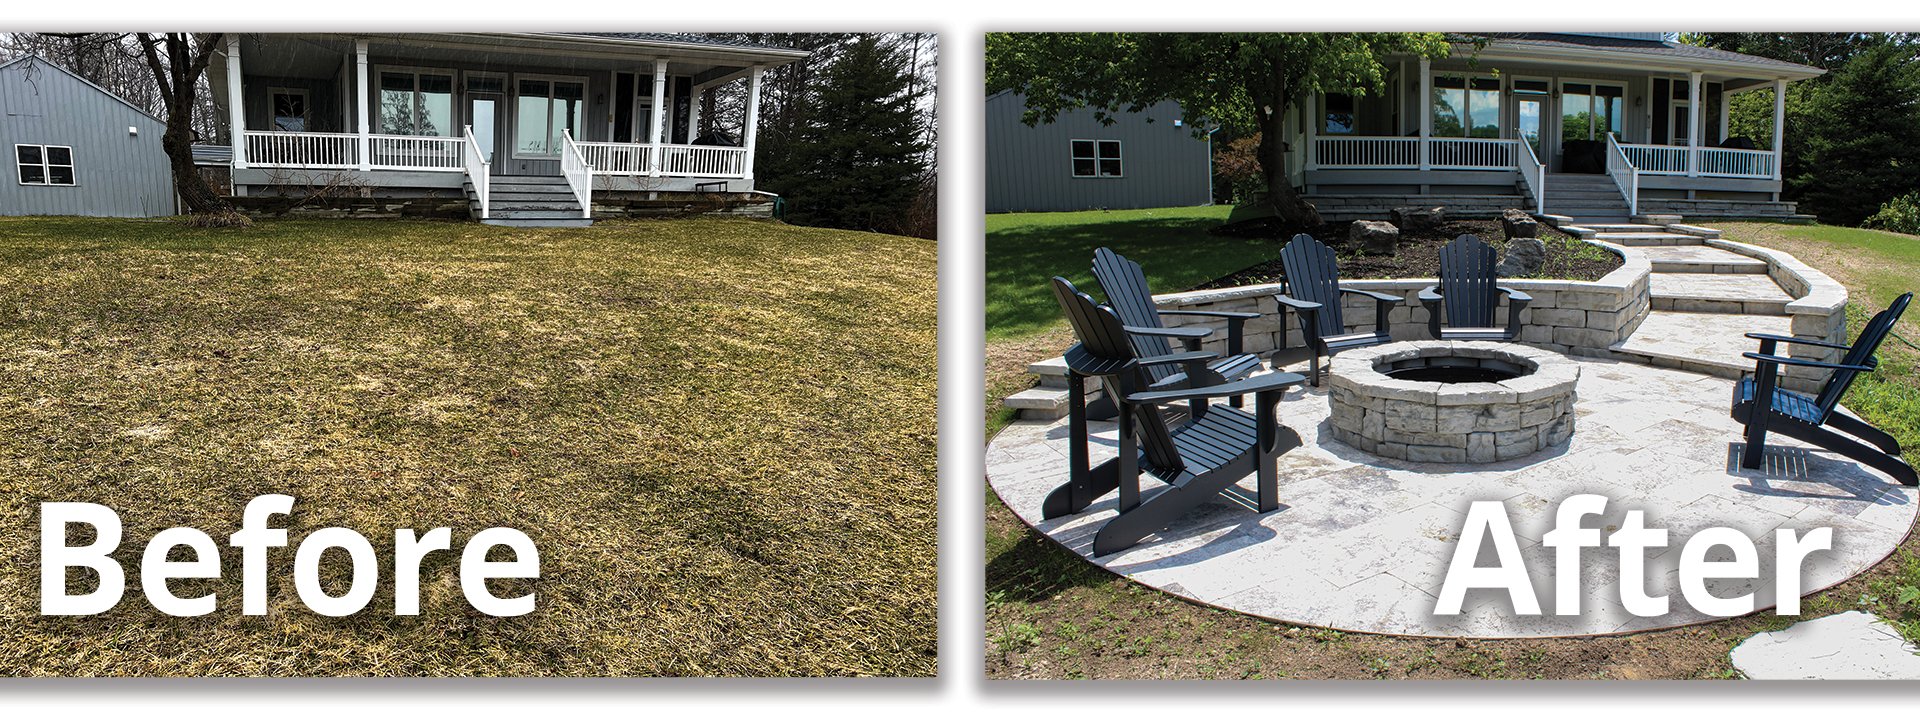 Before and After - Firepit.jpg